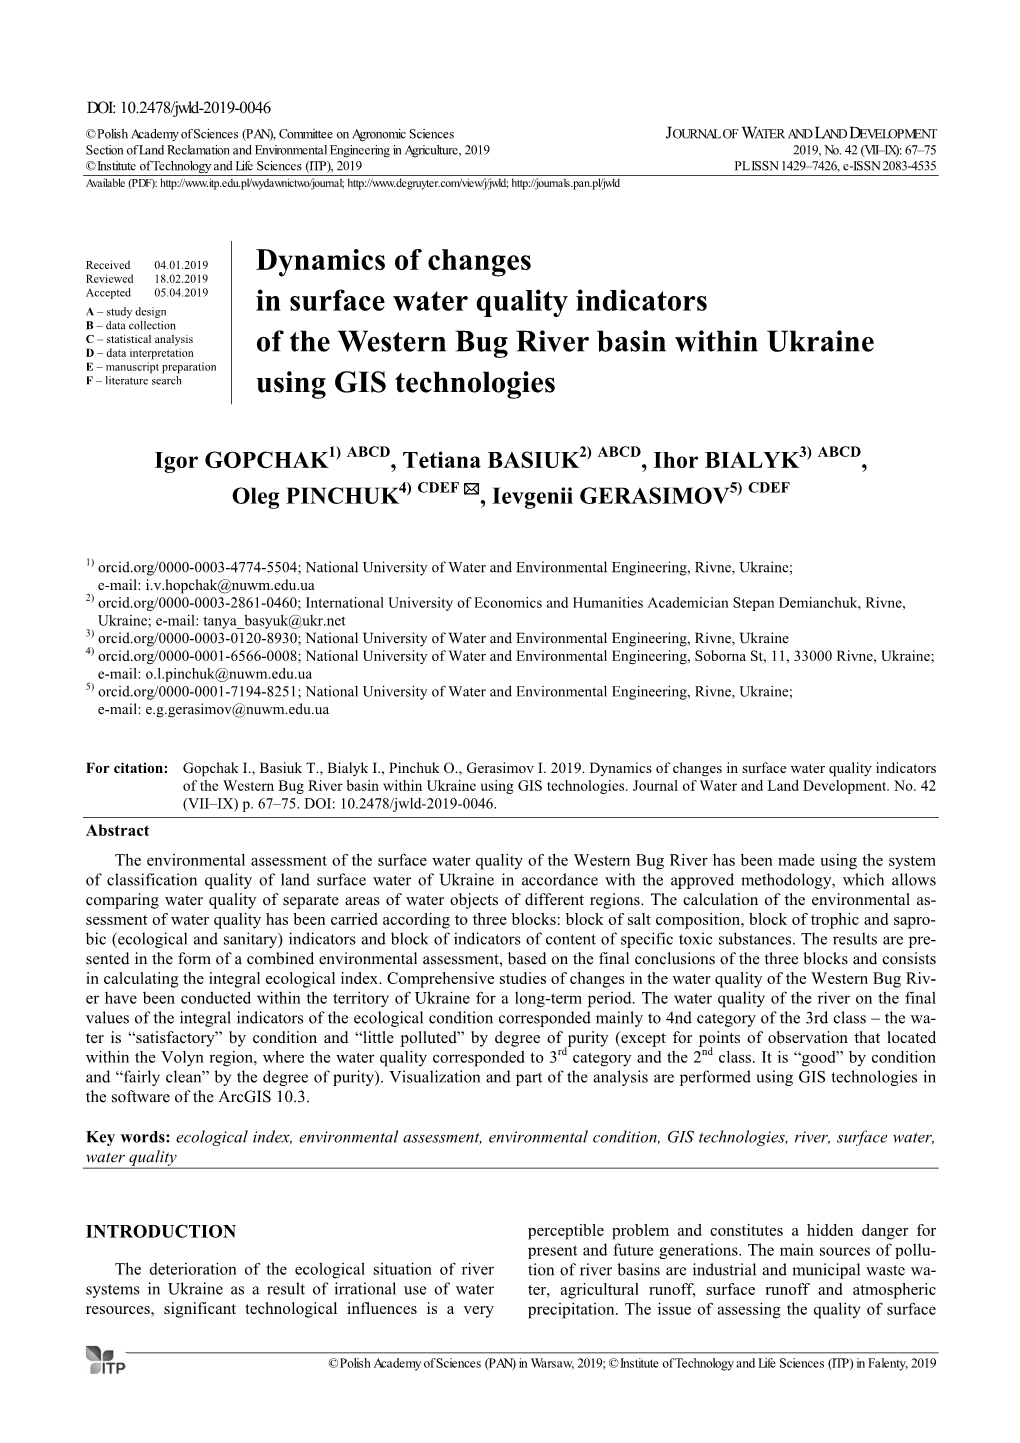 Dynamics of Changes in Surface Water Quality Indicators of the Western Bug River Basin Within Ukraine Using GIS Technologies